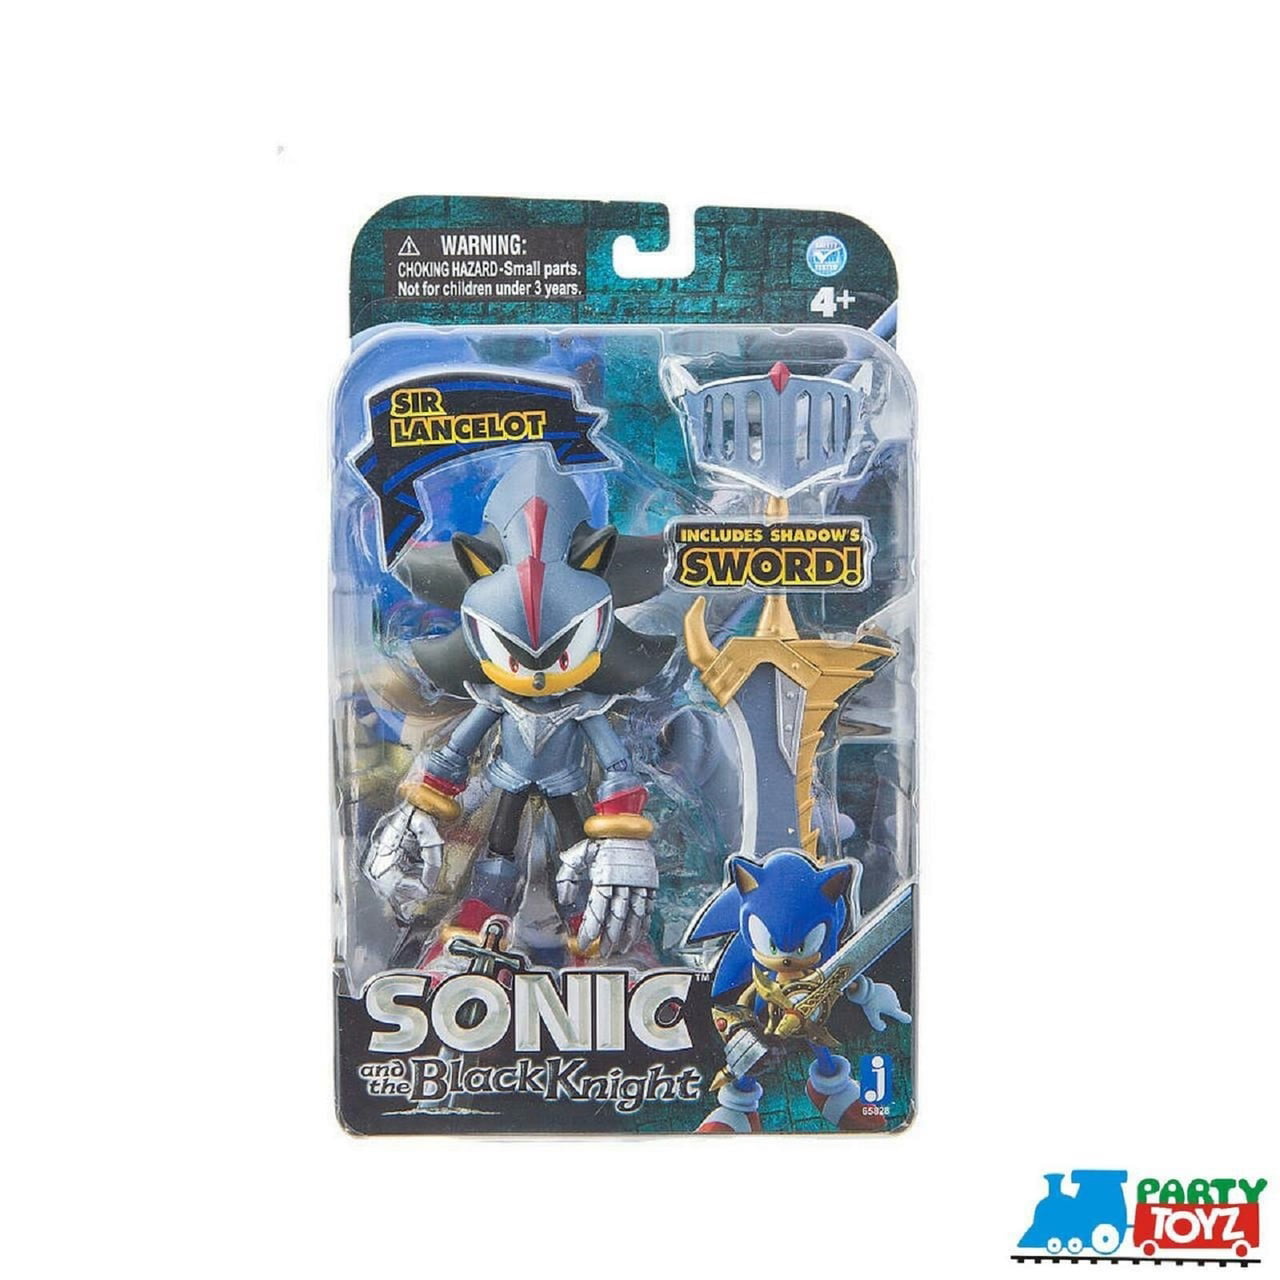 sonic and the black knight action figures